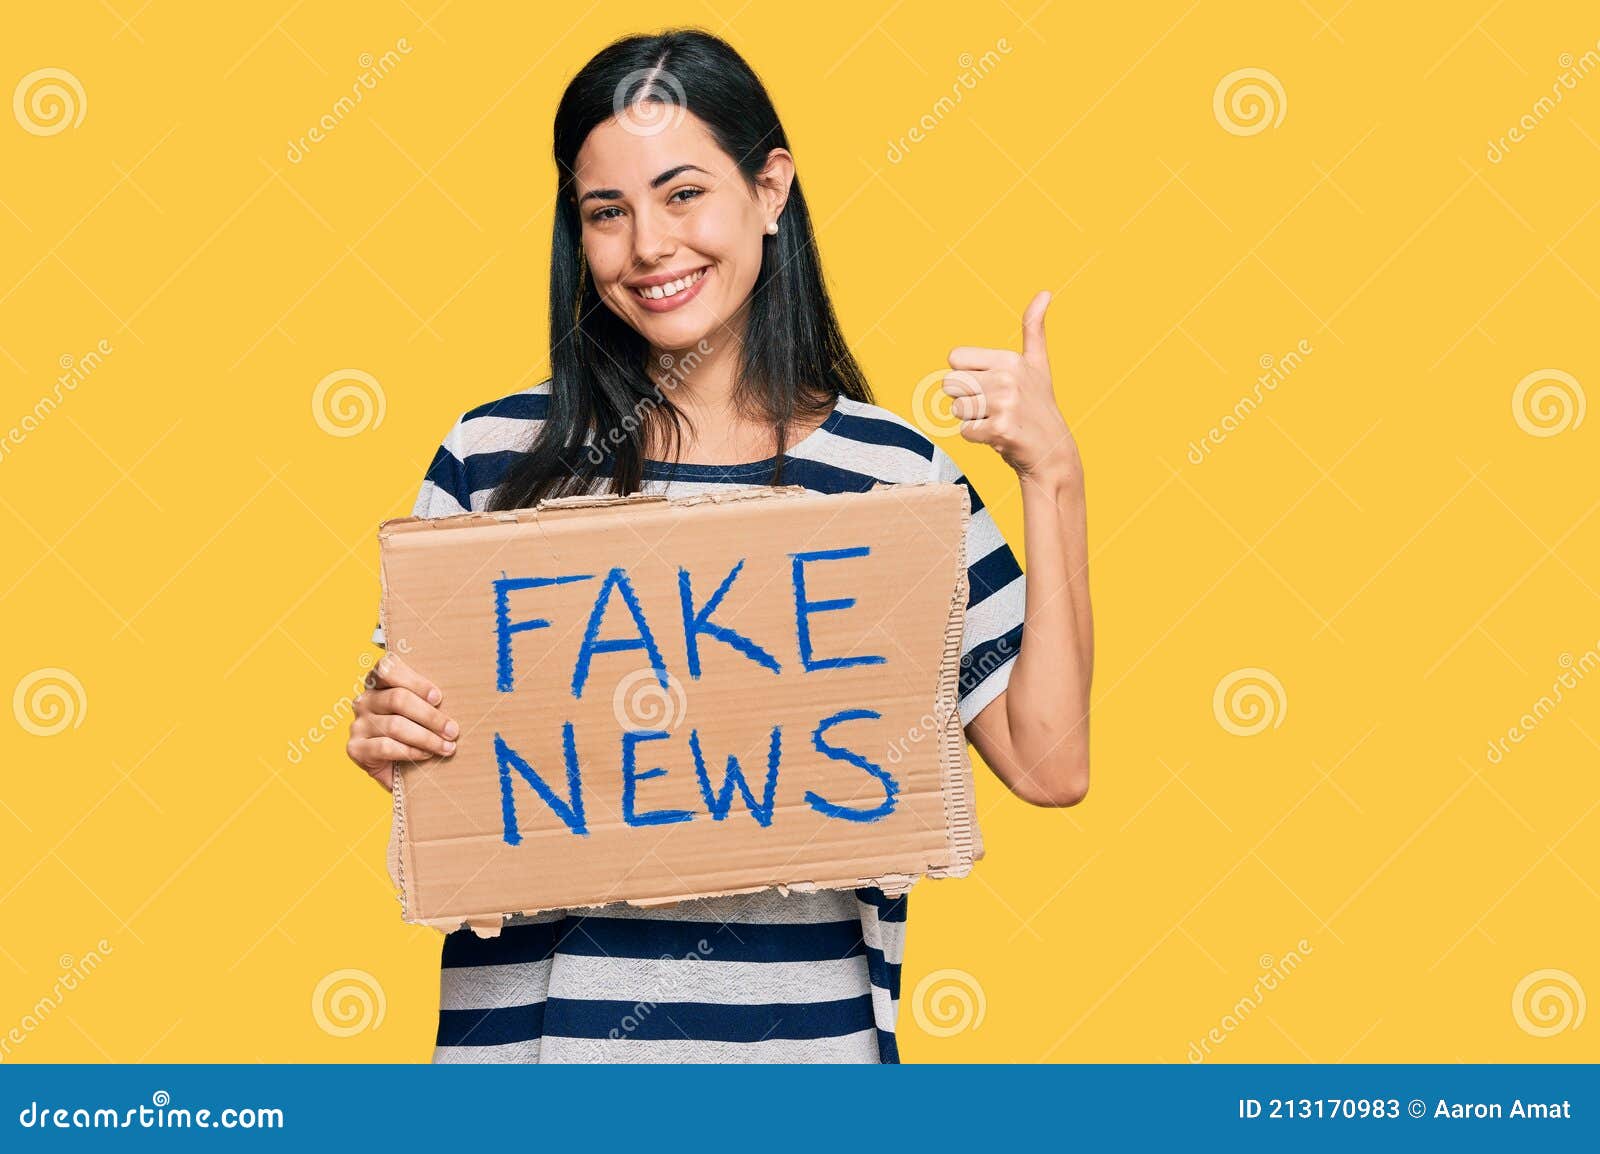 Beautiful Young Woman Holding Fake News Banner Smiling Happy and ...